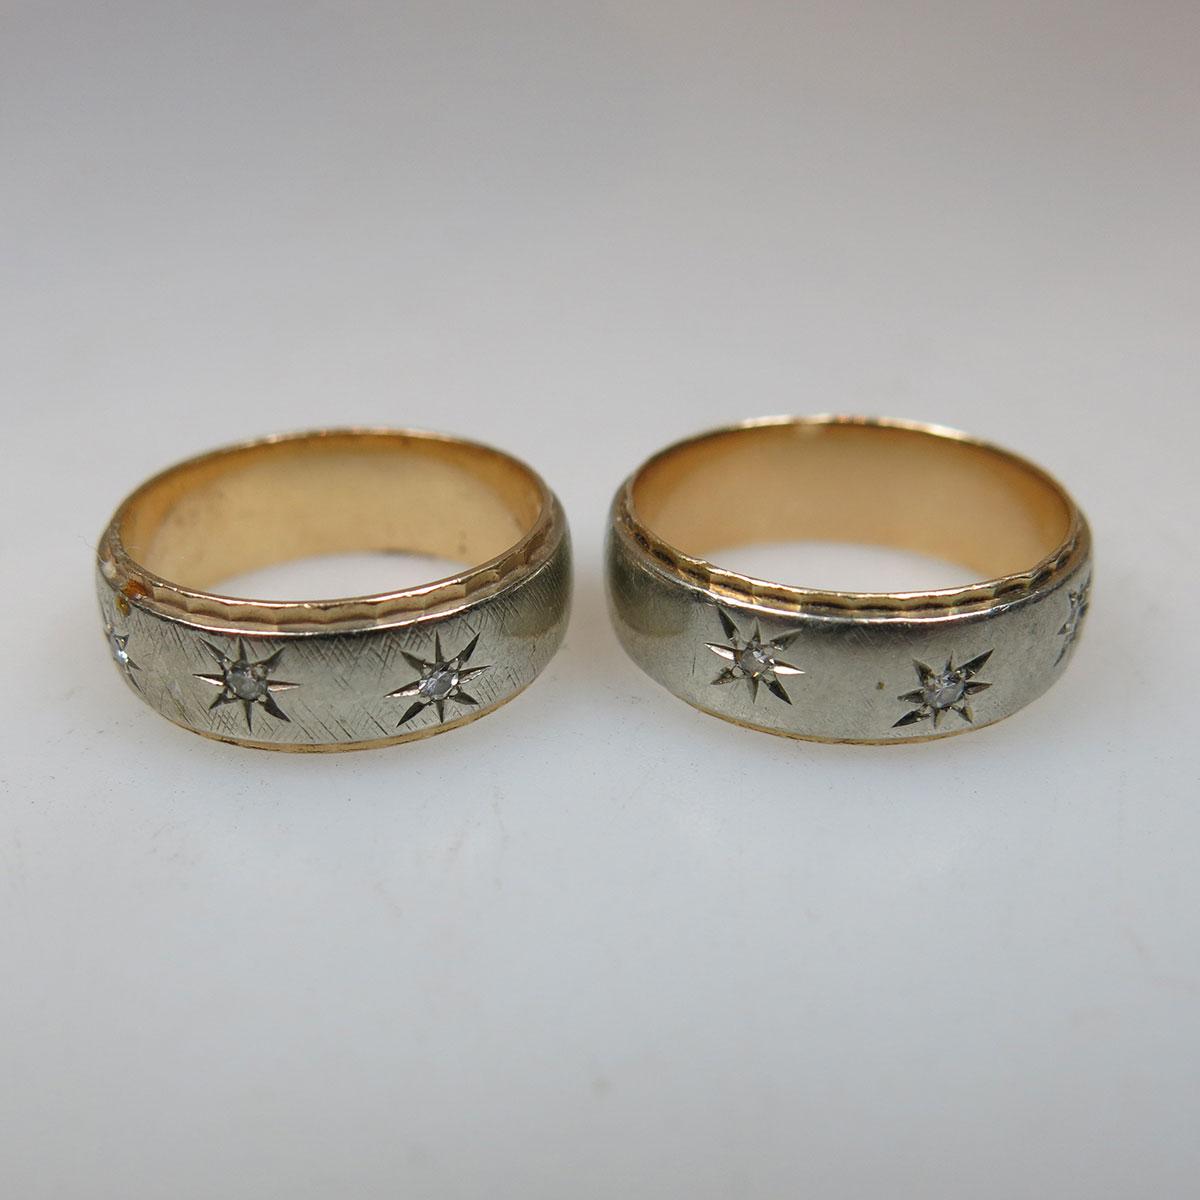 2 x 14k Yellow Gold And White Gold Bands